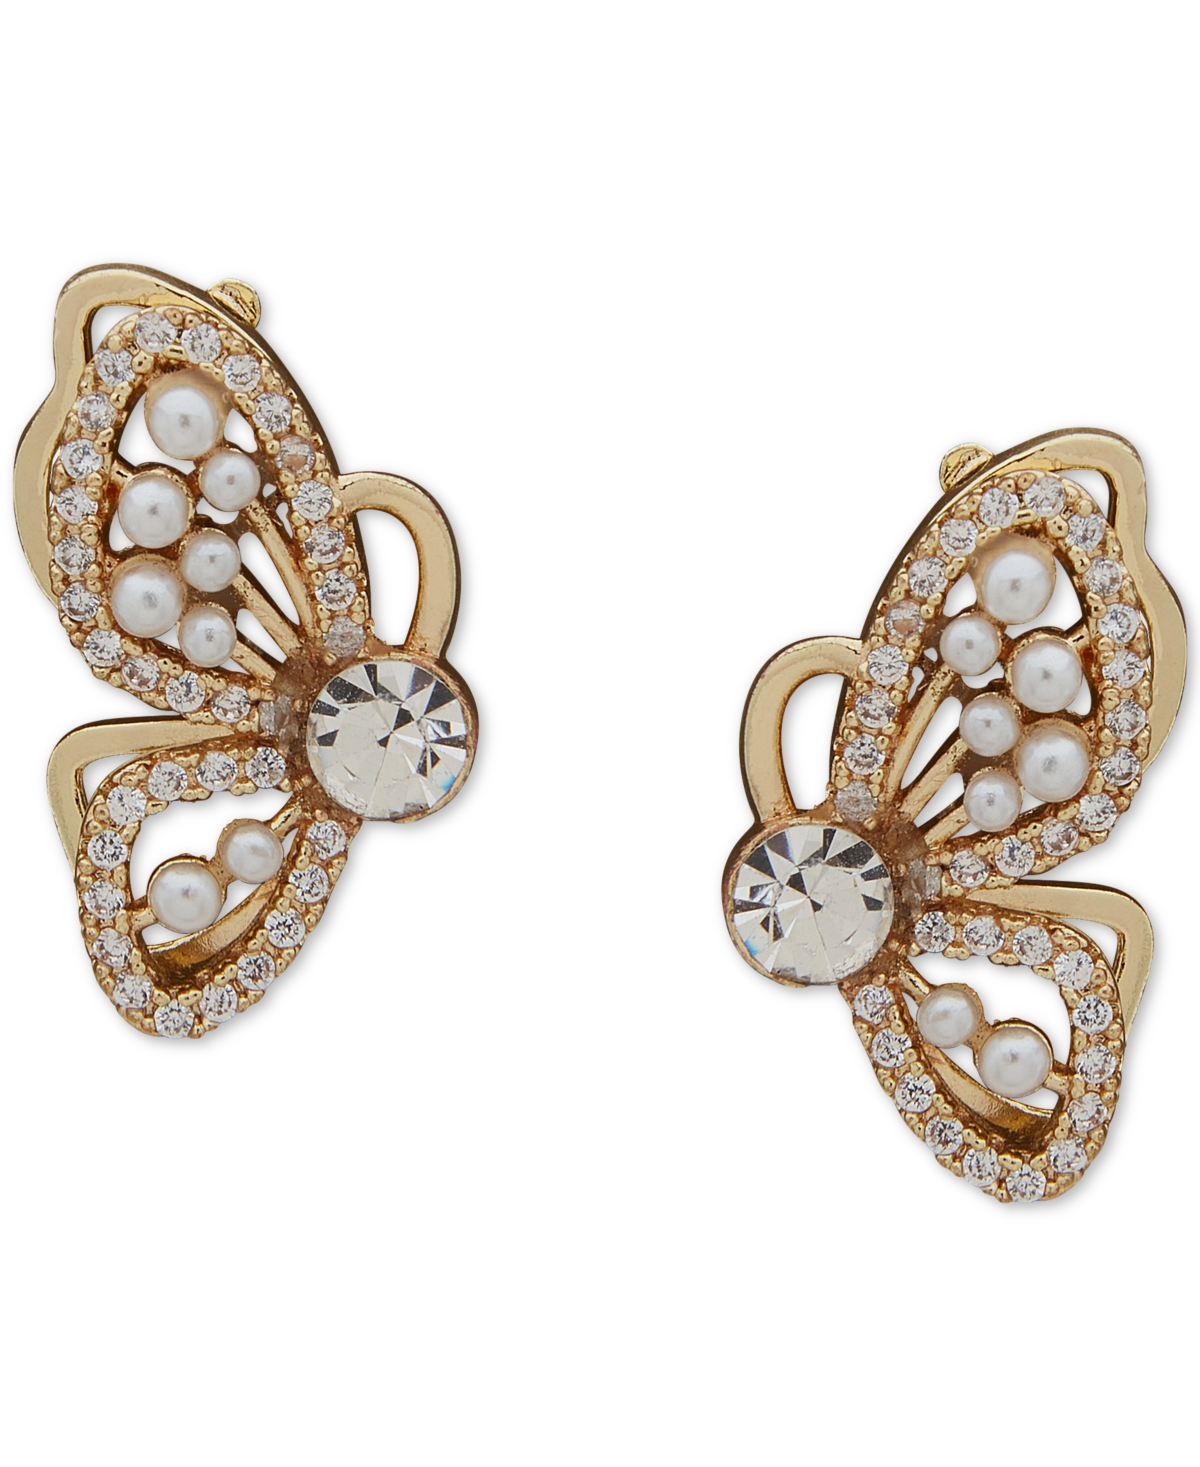 Lonna & Lilly Gold-tone Pave & Imitation Pearl Filigree Butterfly Stud Earrings In White